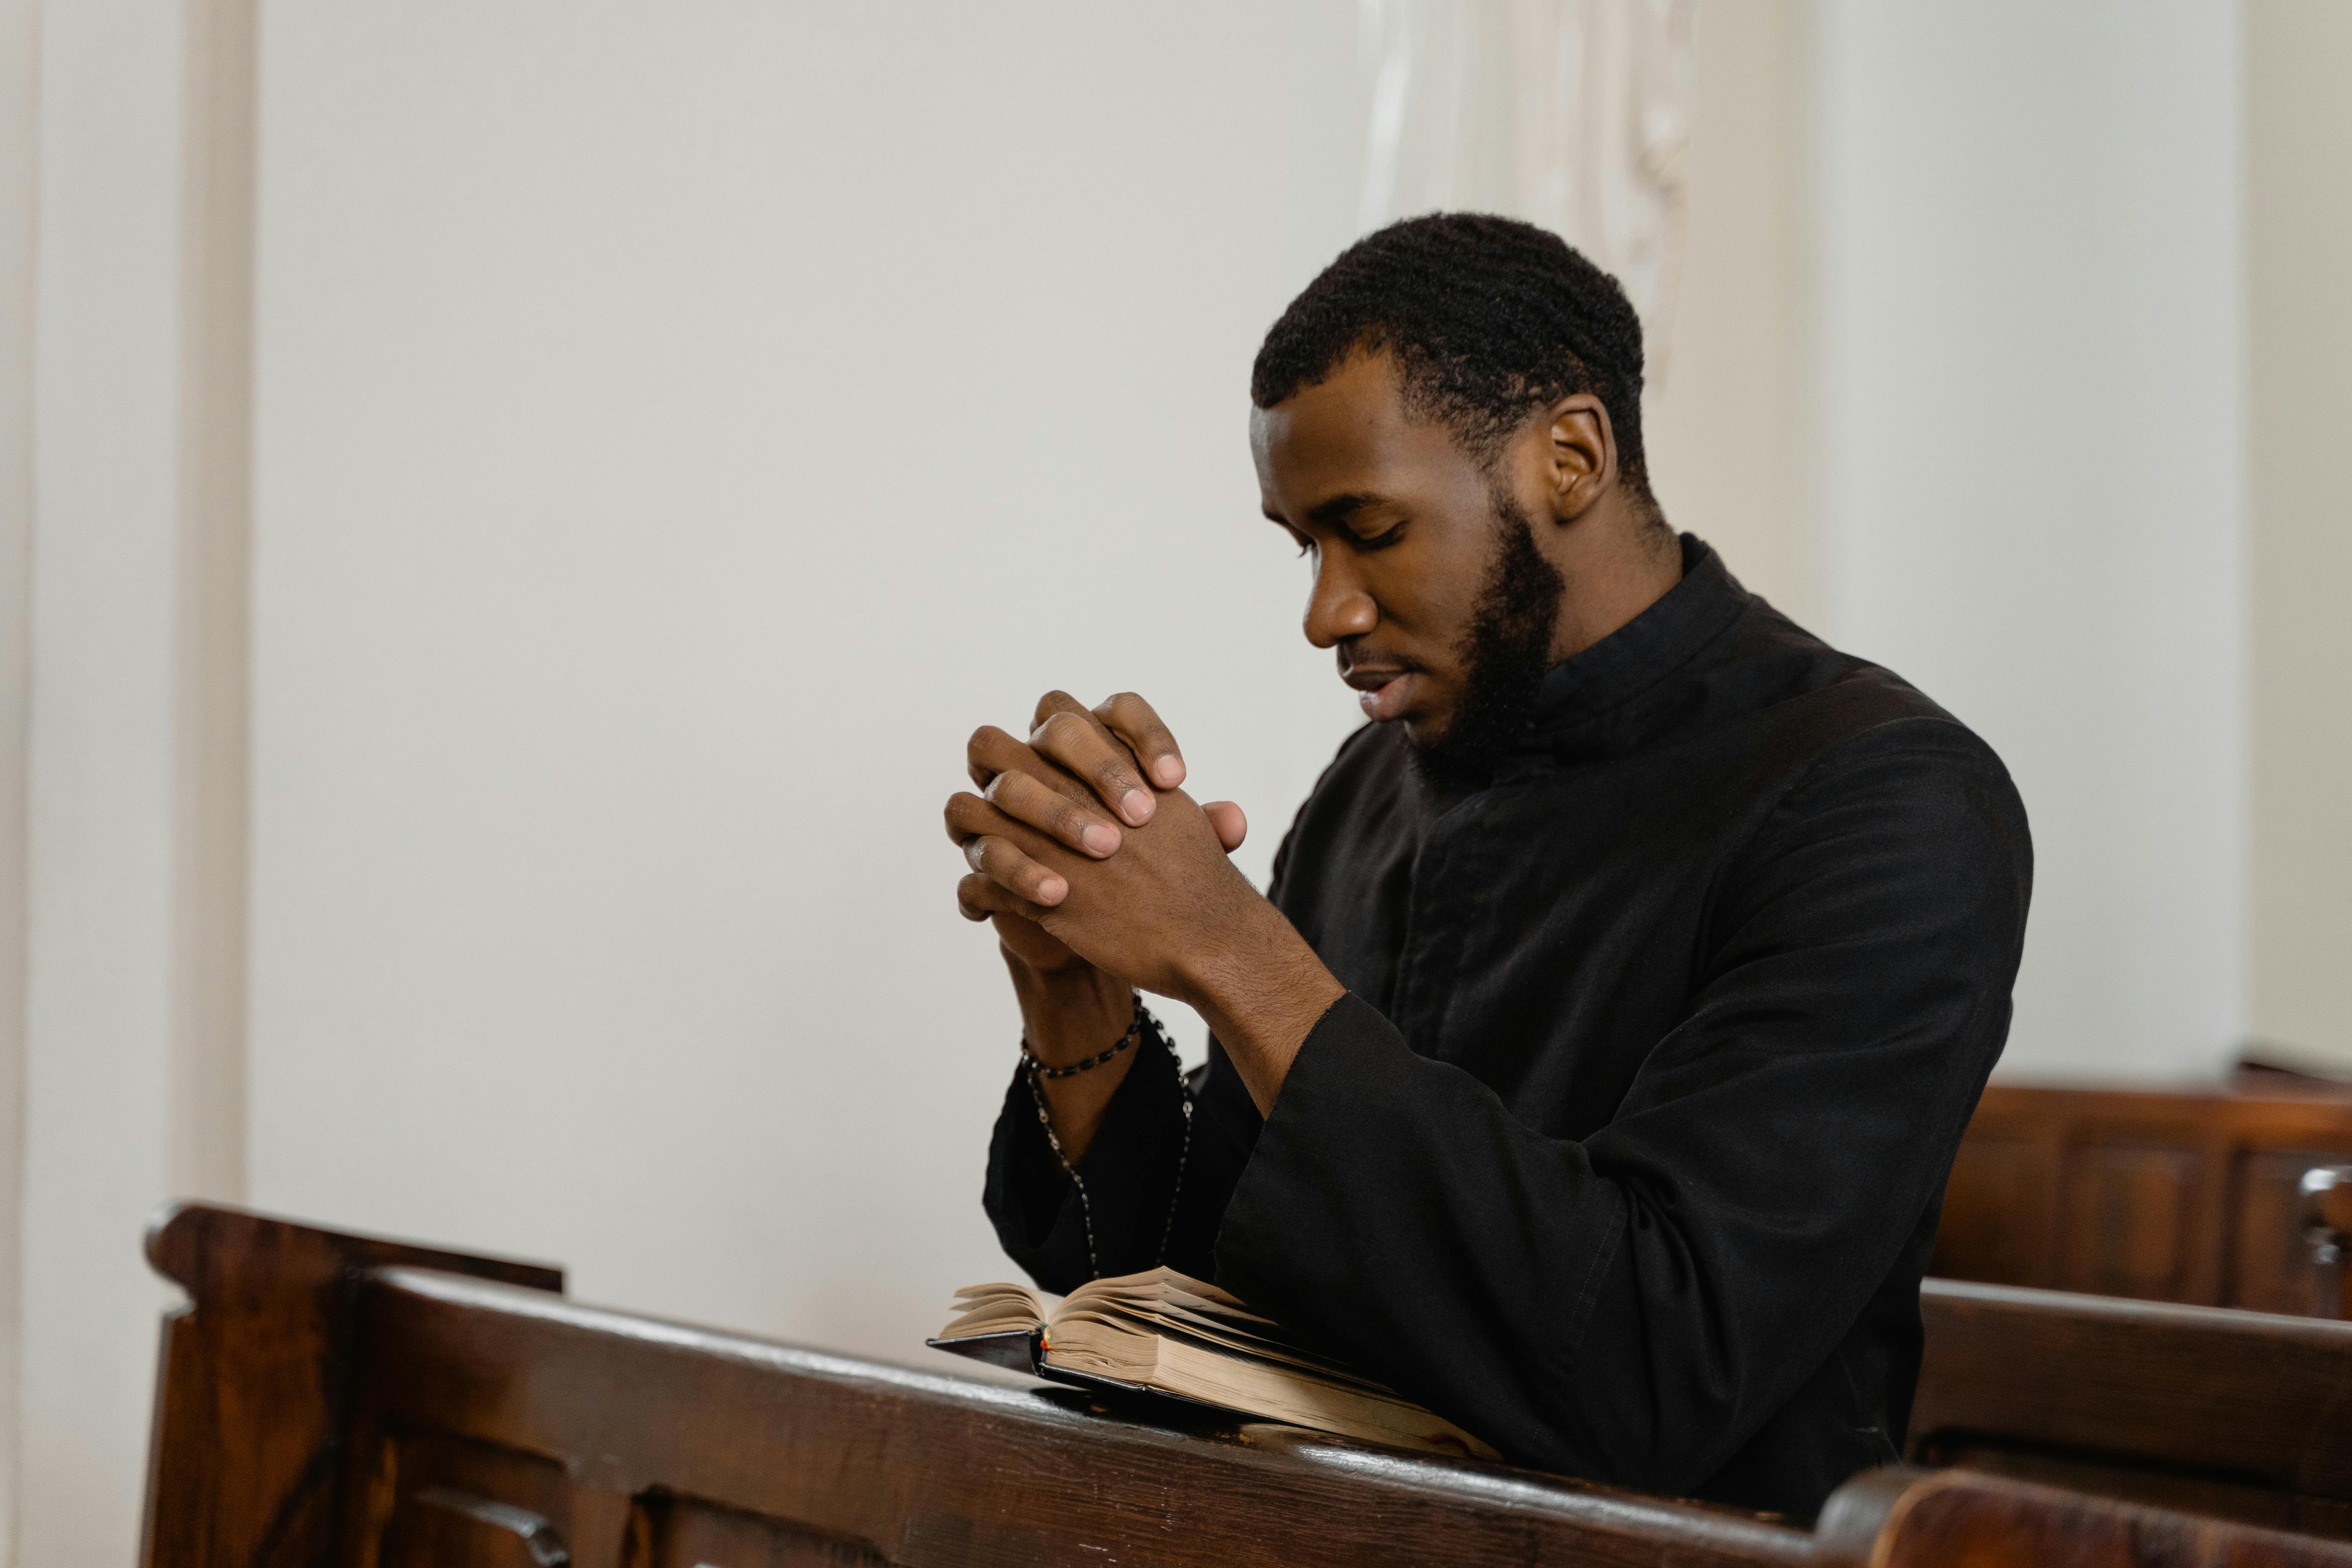 A religious man in black shirt praying solemnly